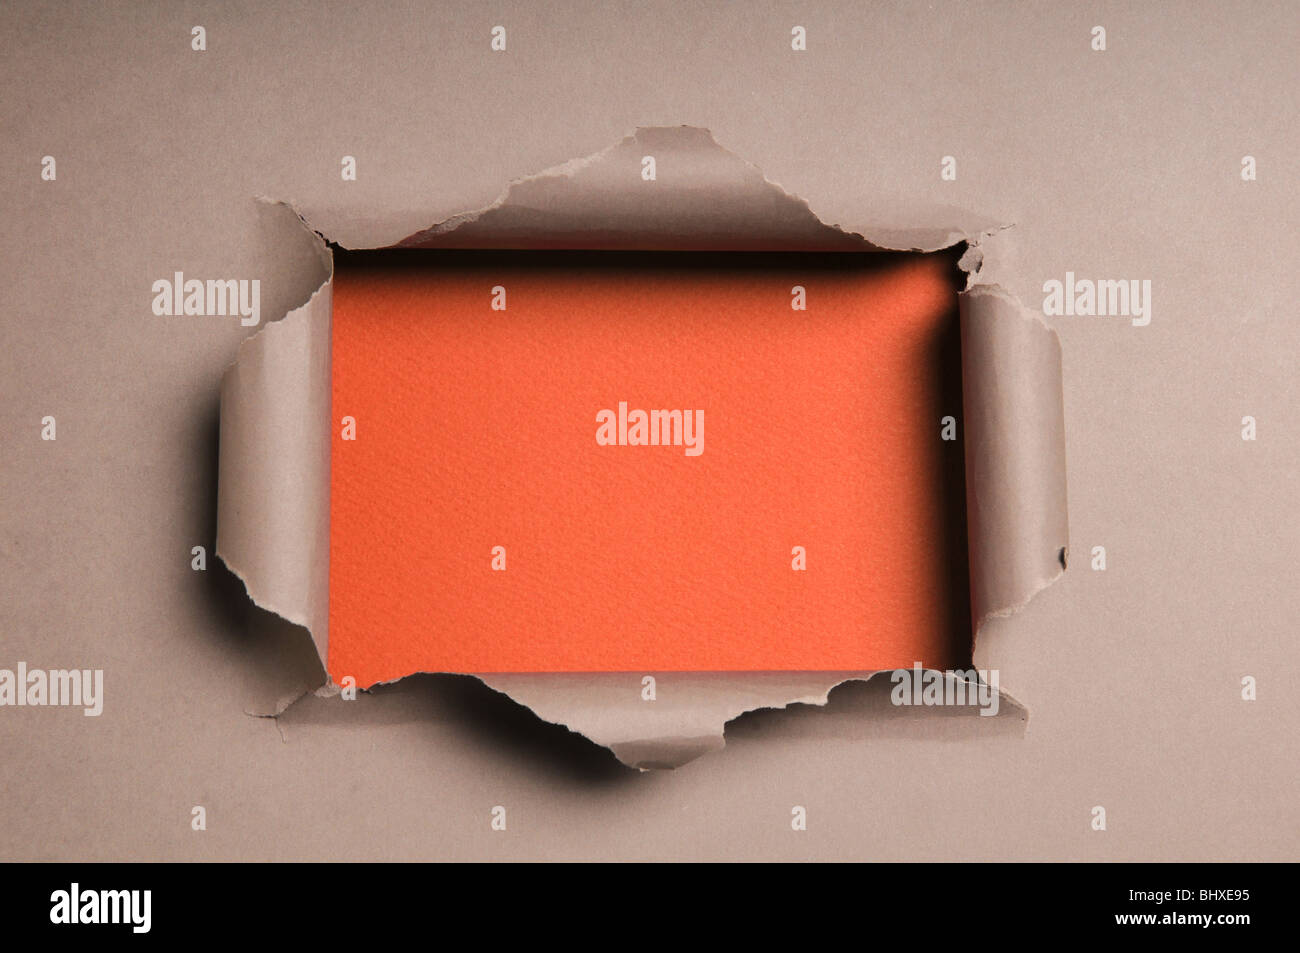 Beige paper ripped to form a rectangle over orange paper in background Stock Photo